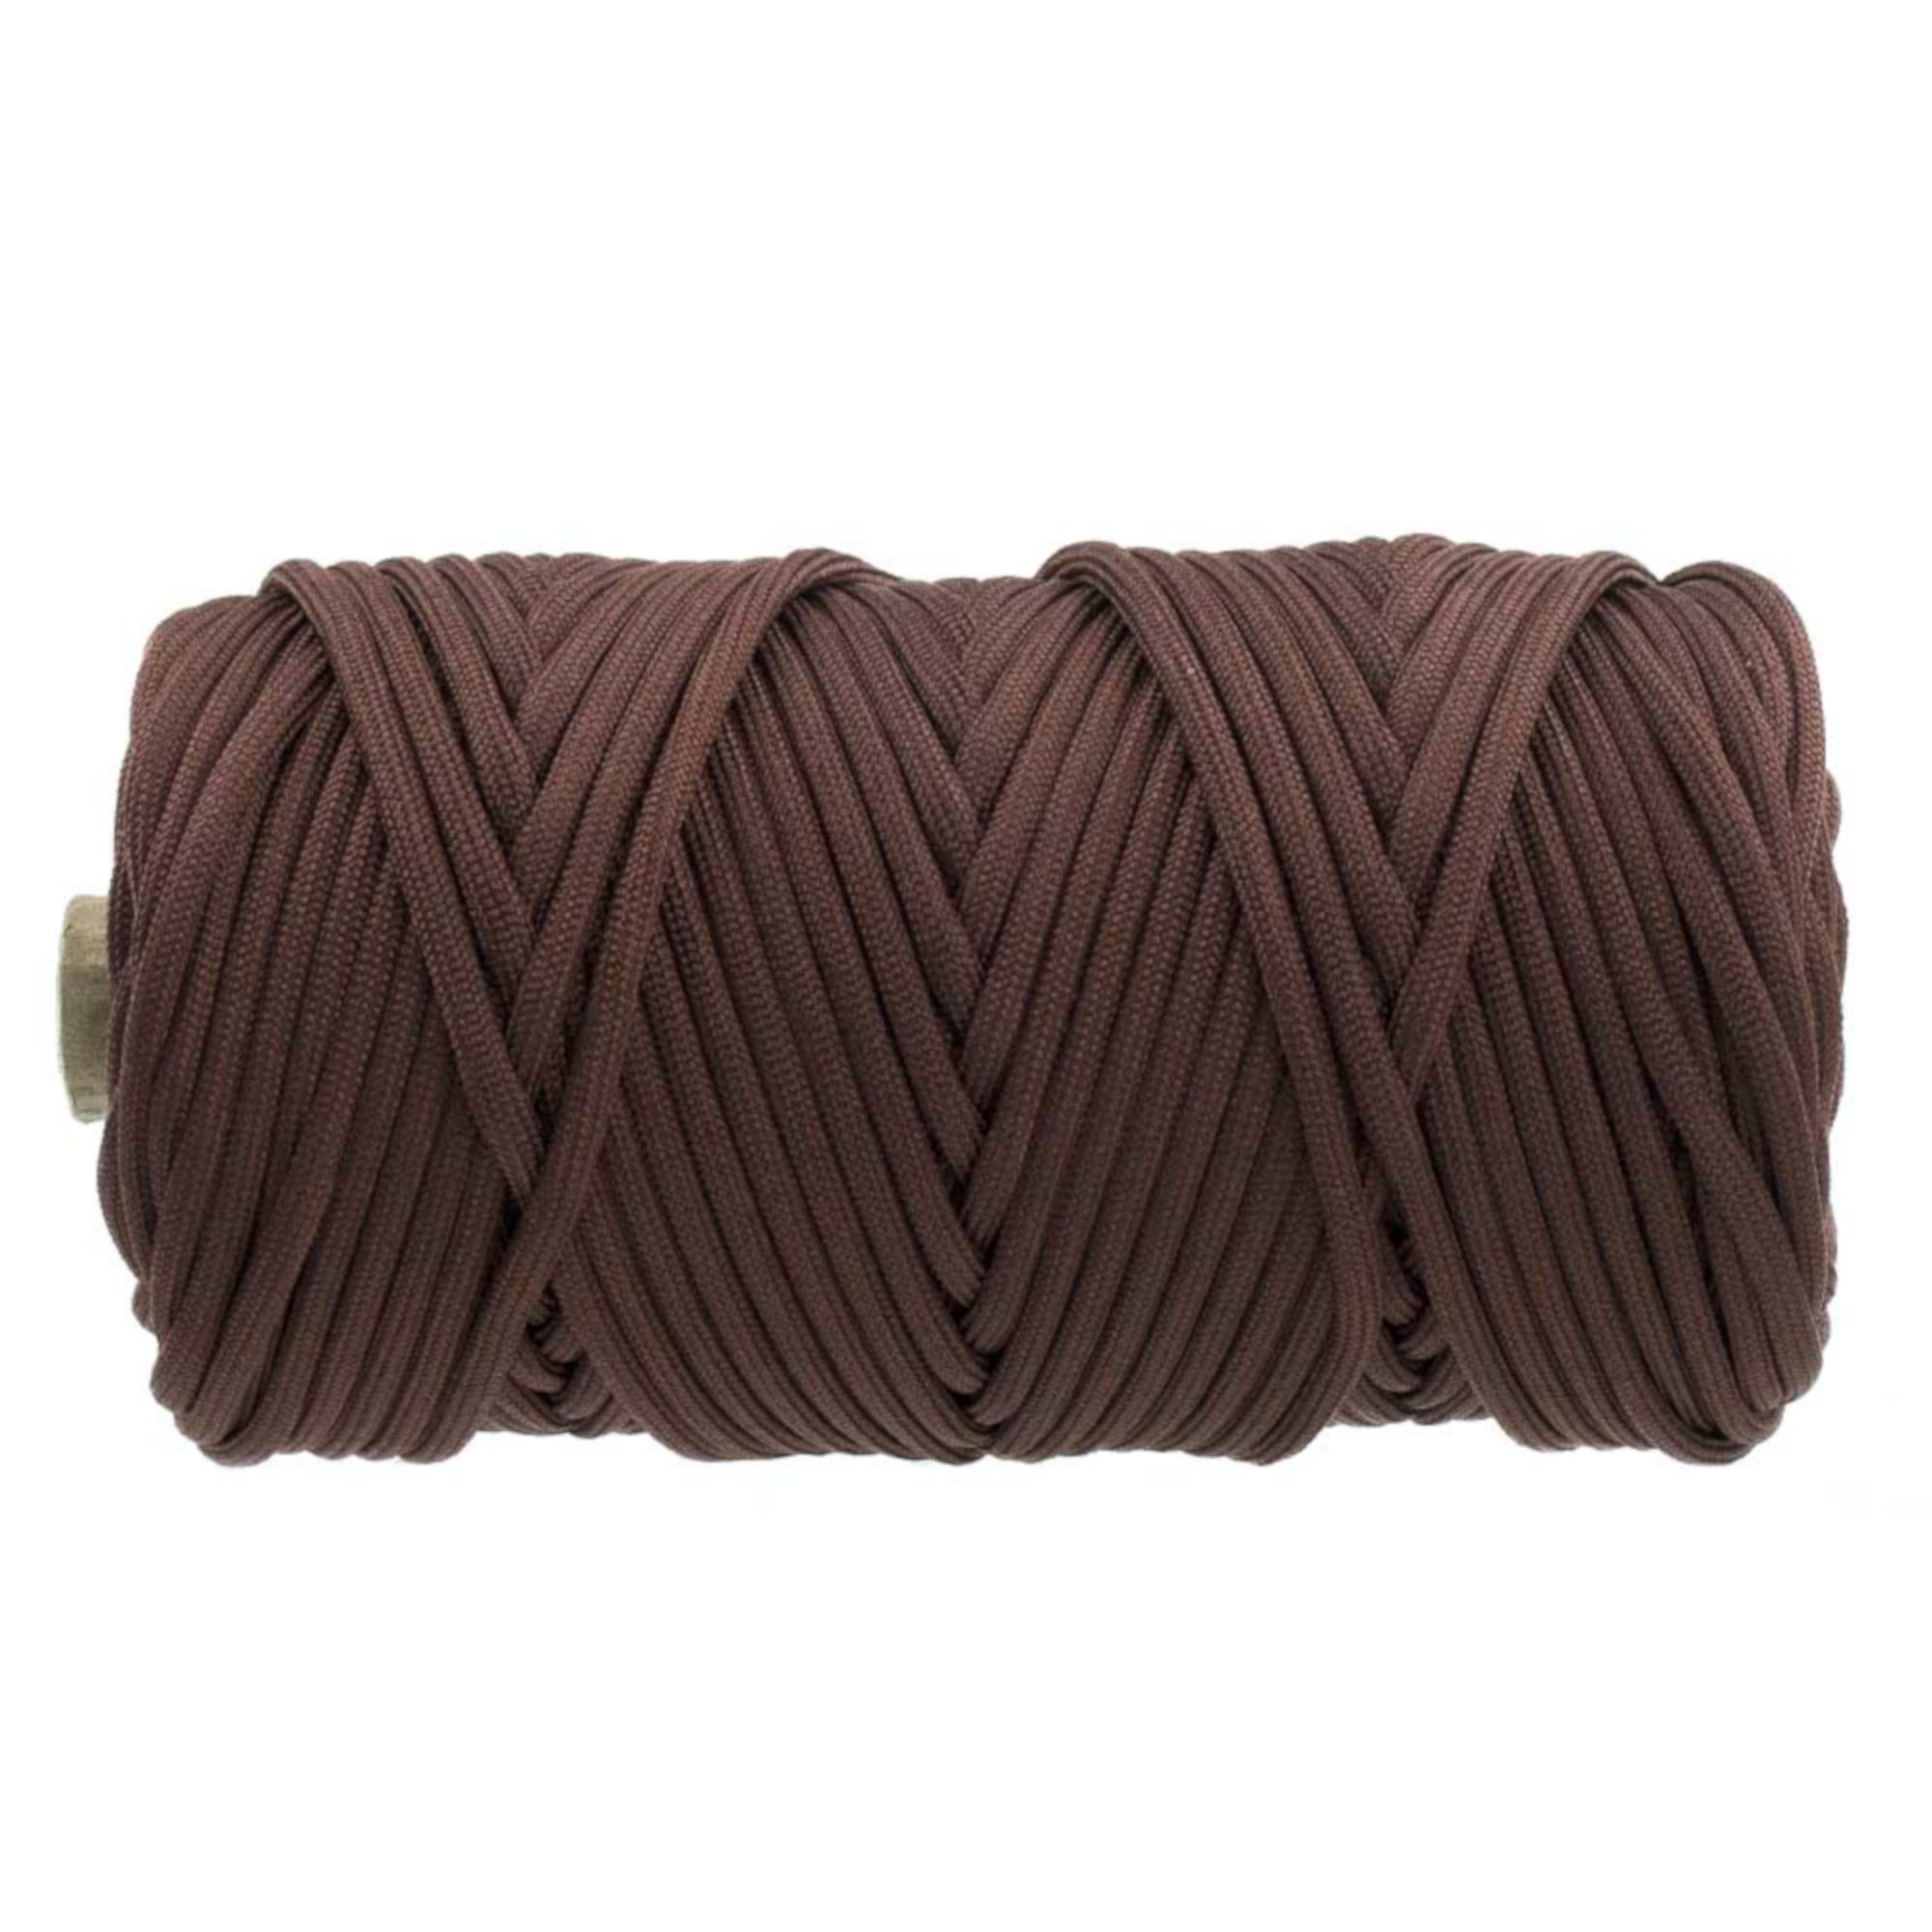 Commercial 750 lb Parachute Cord Type IV Paracord 1,000 feet on Spool Black Colo 